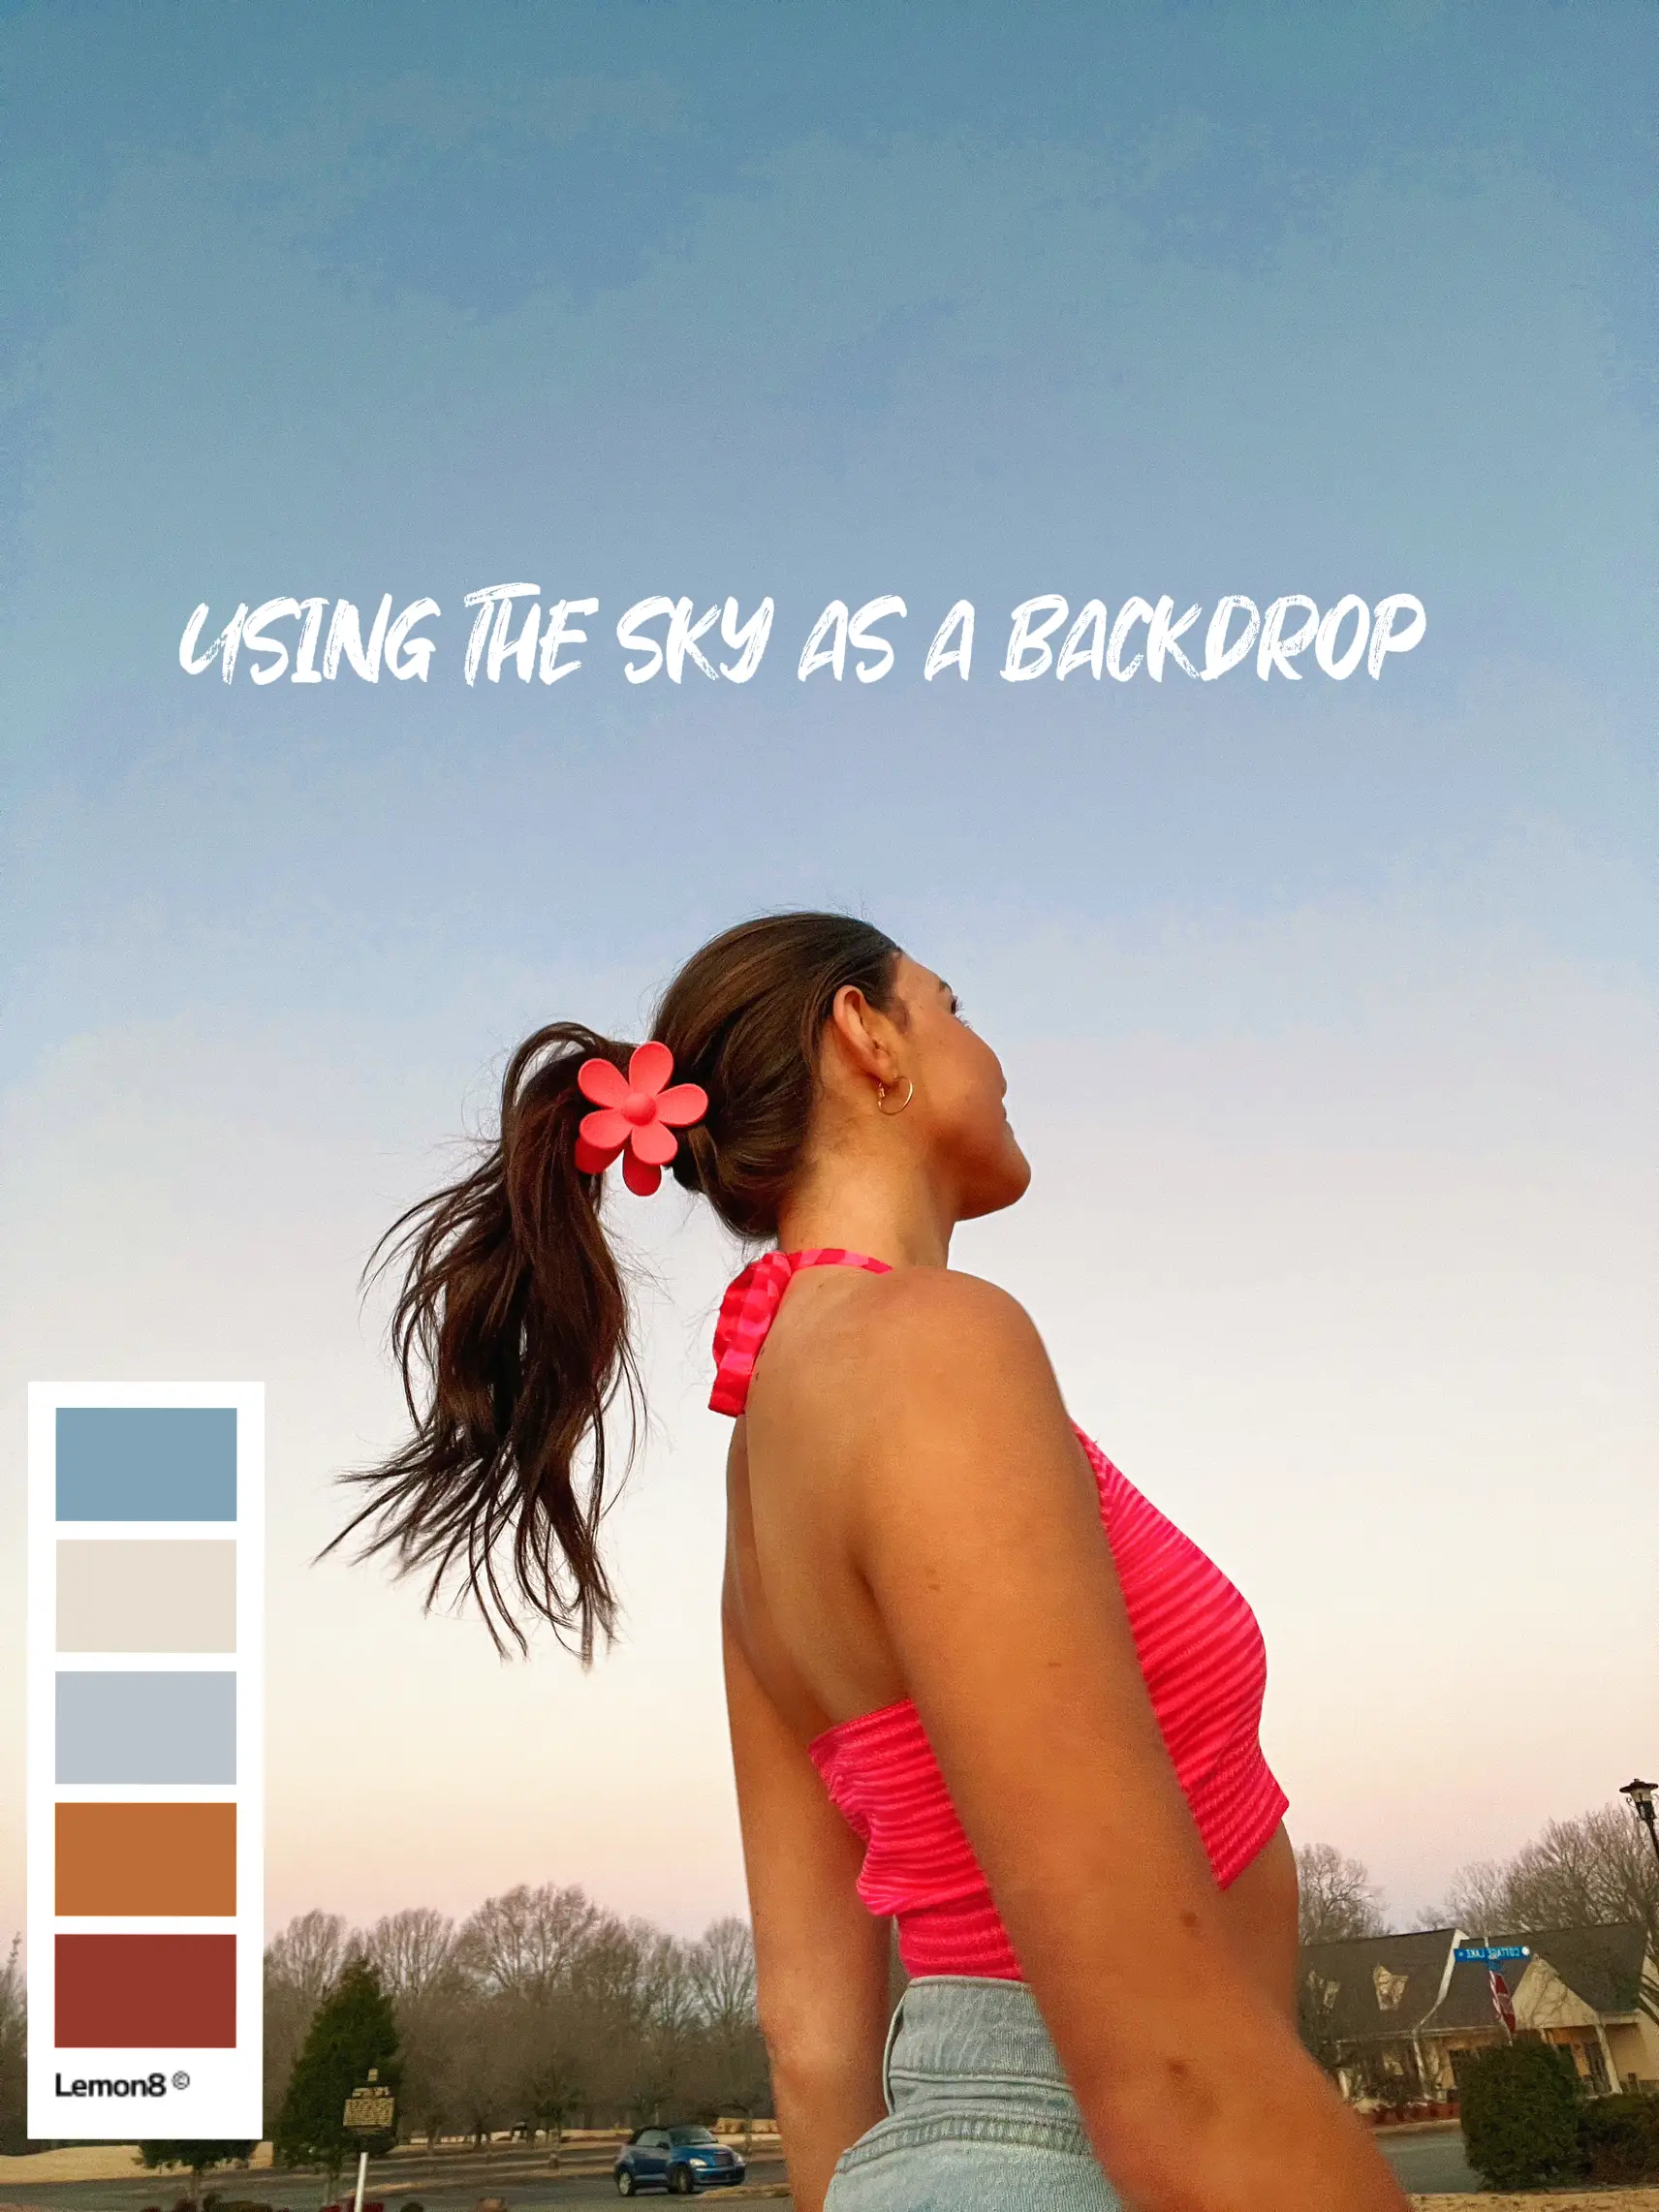  A woman wearing a pink shirt and black pants is standing in front of a blue sky.